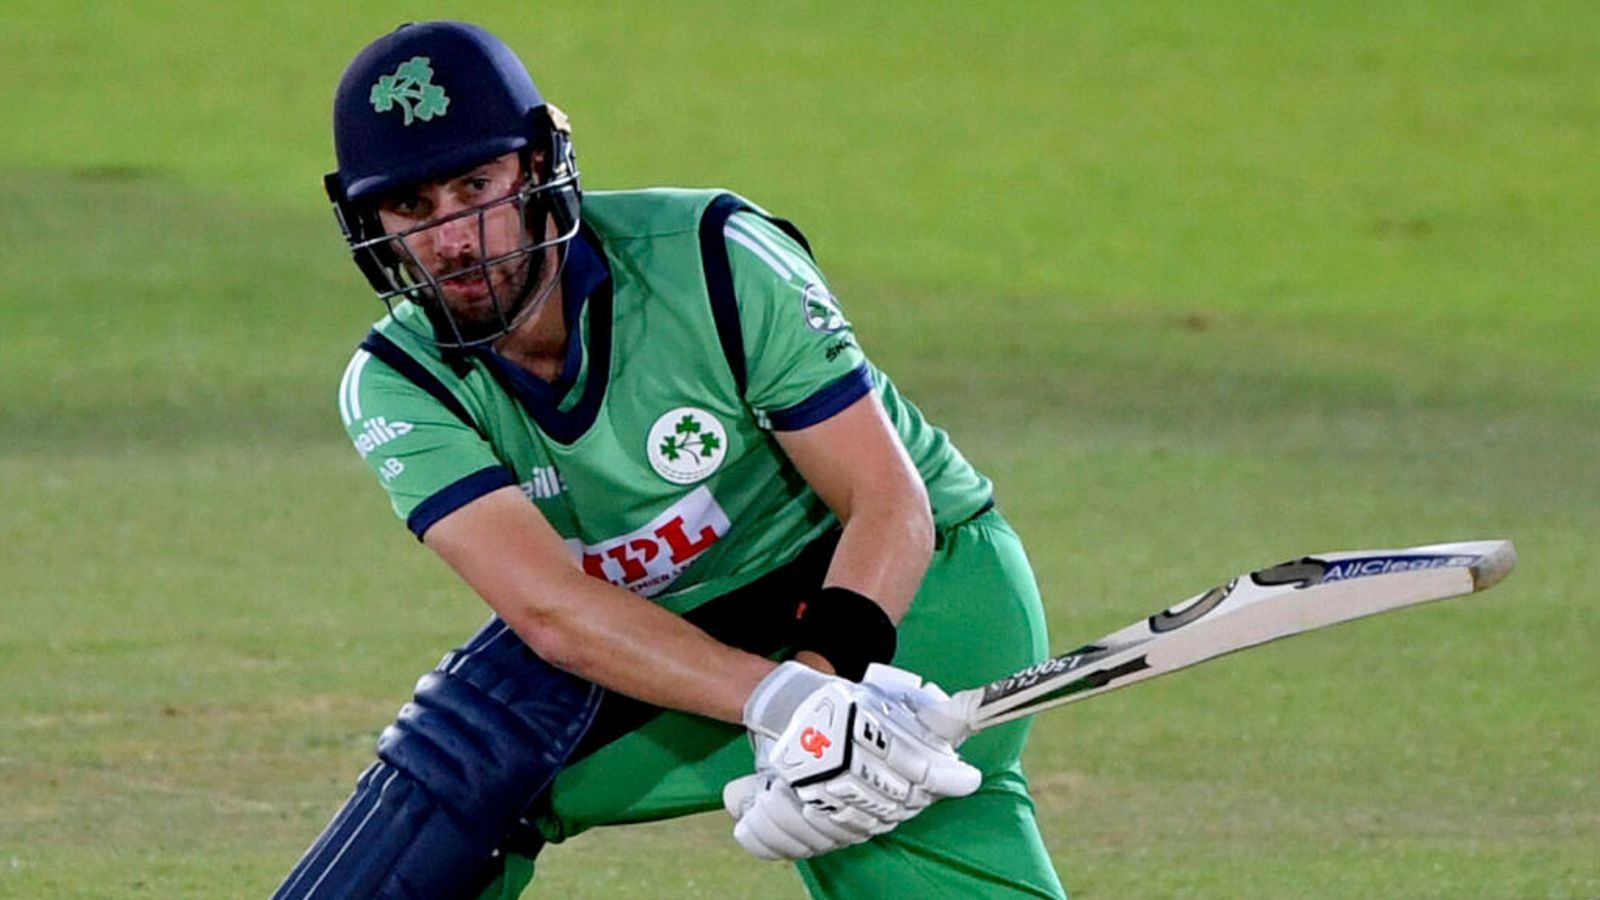 Ireland finalises their World Cup squad, Barry McCarthy left out.